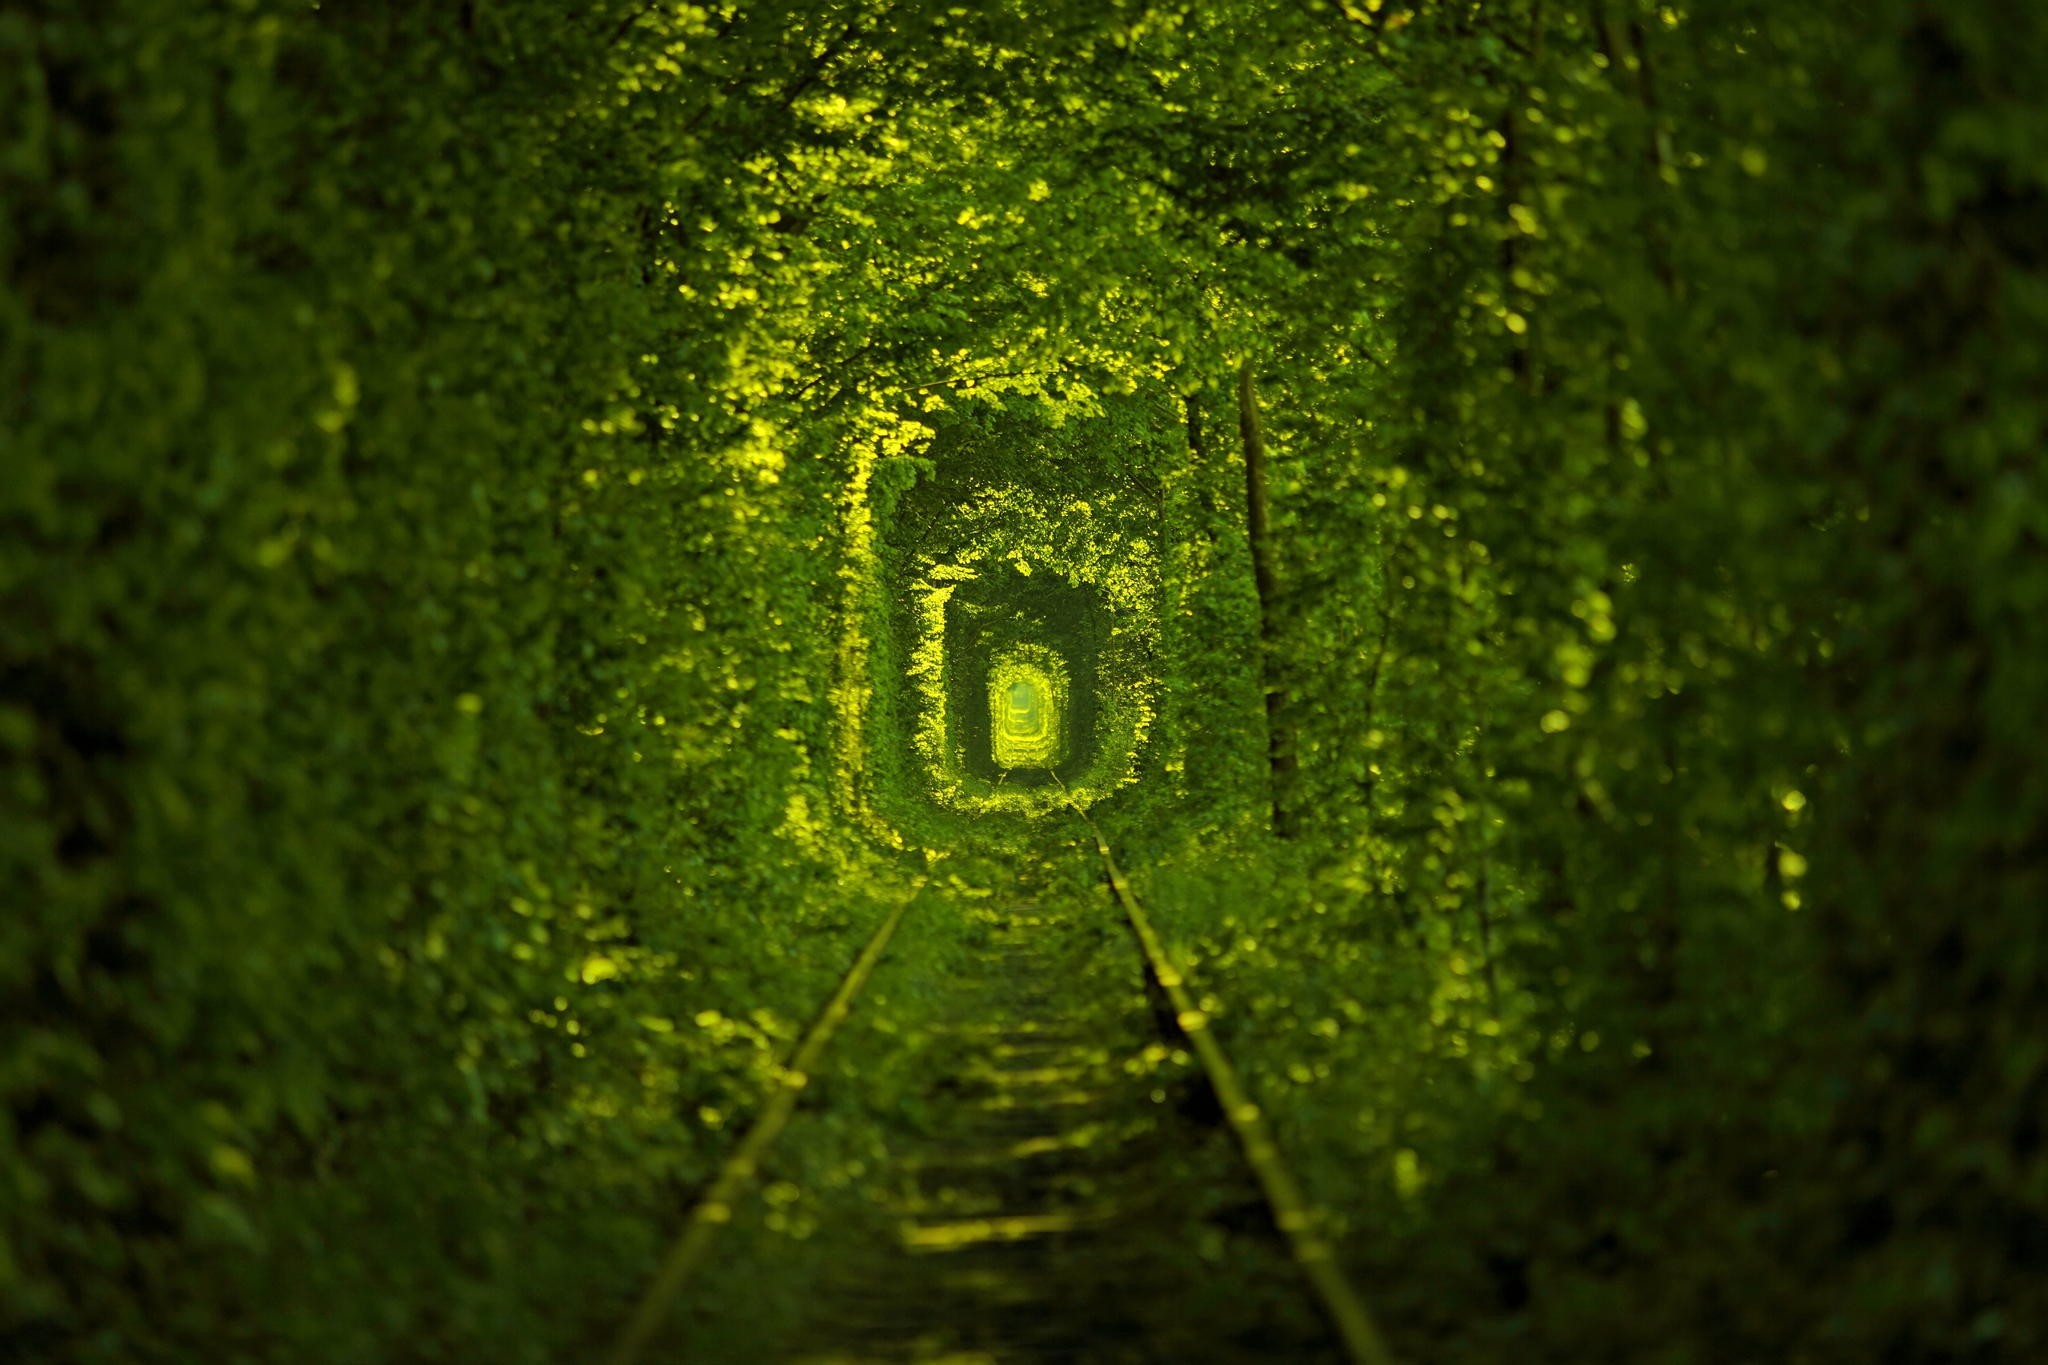 General 2048x1365 nature railway trees green leaves tunnel Tunnel of Love